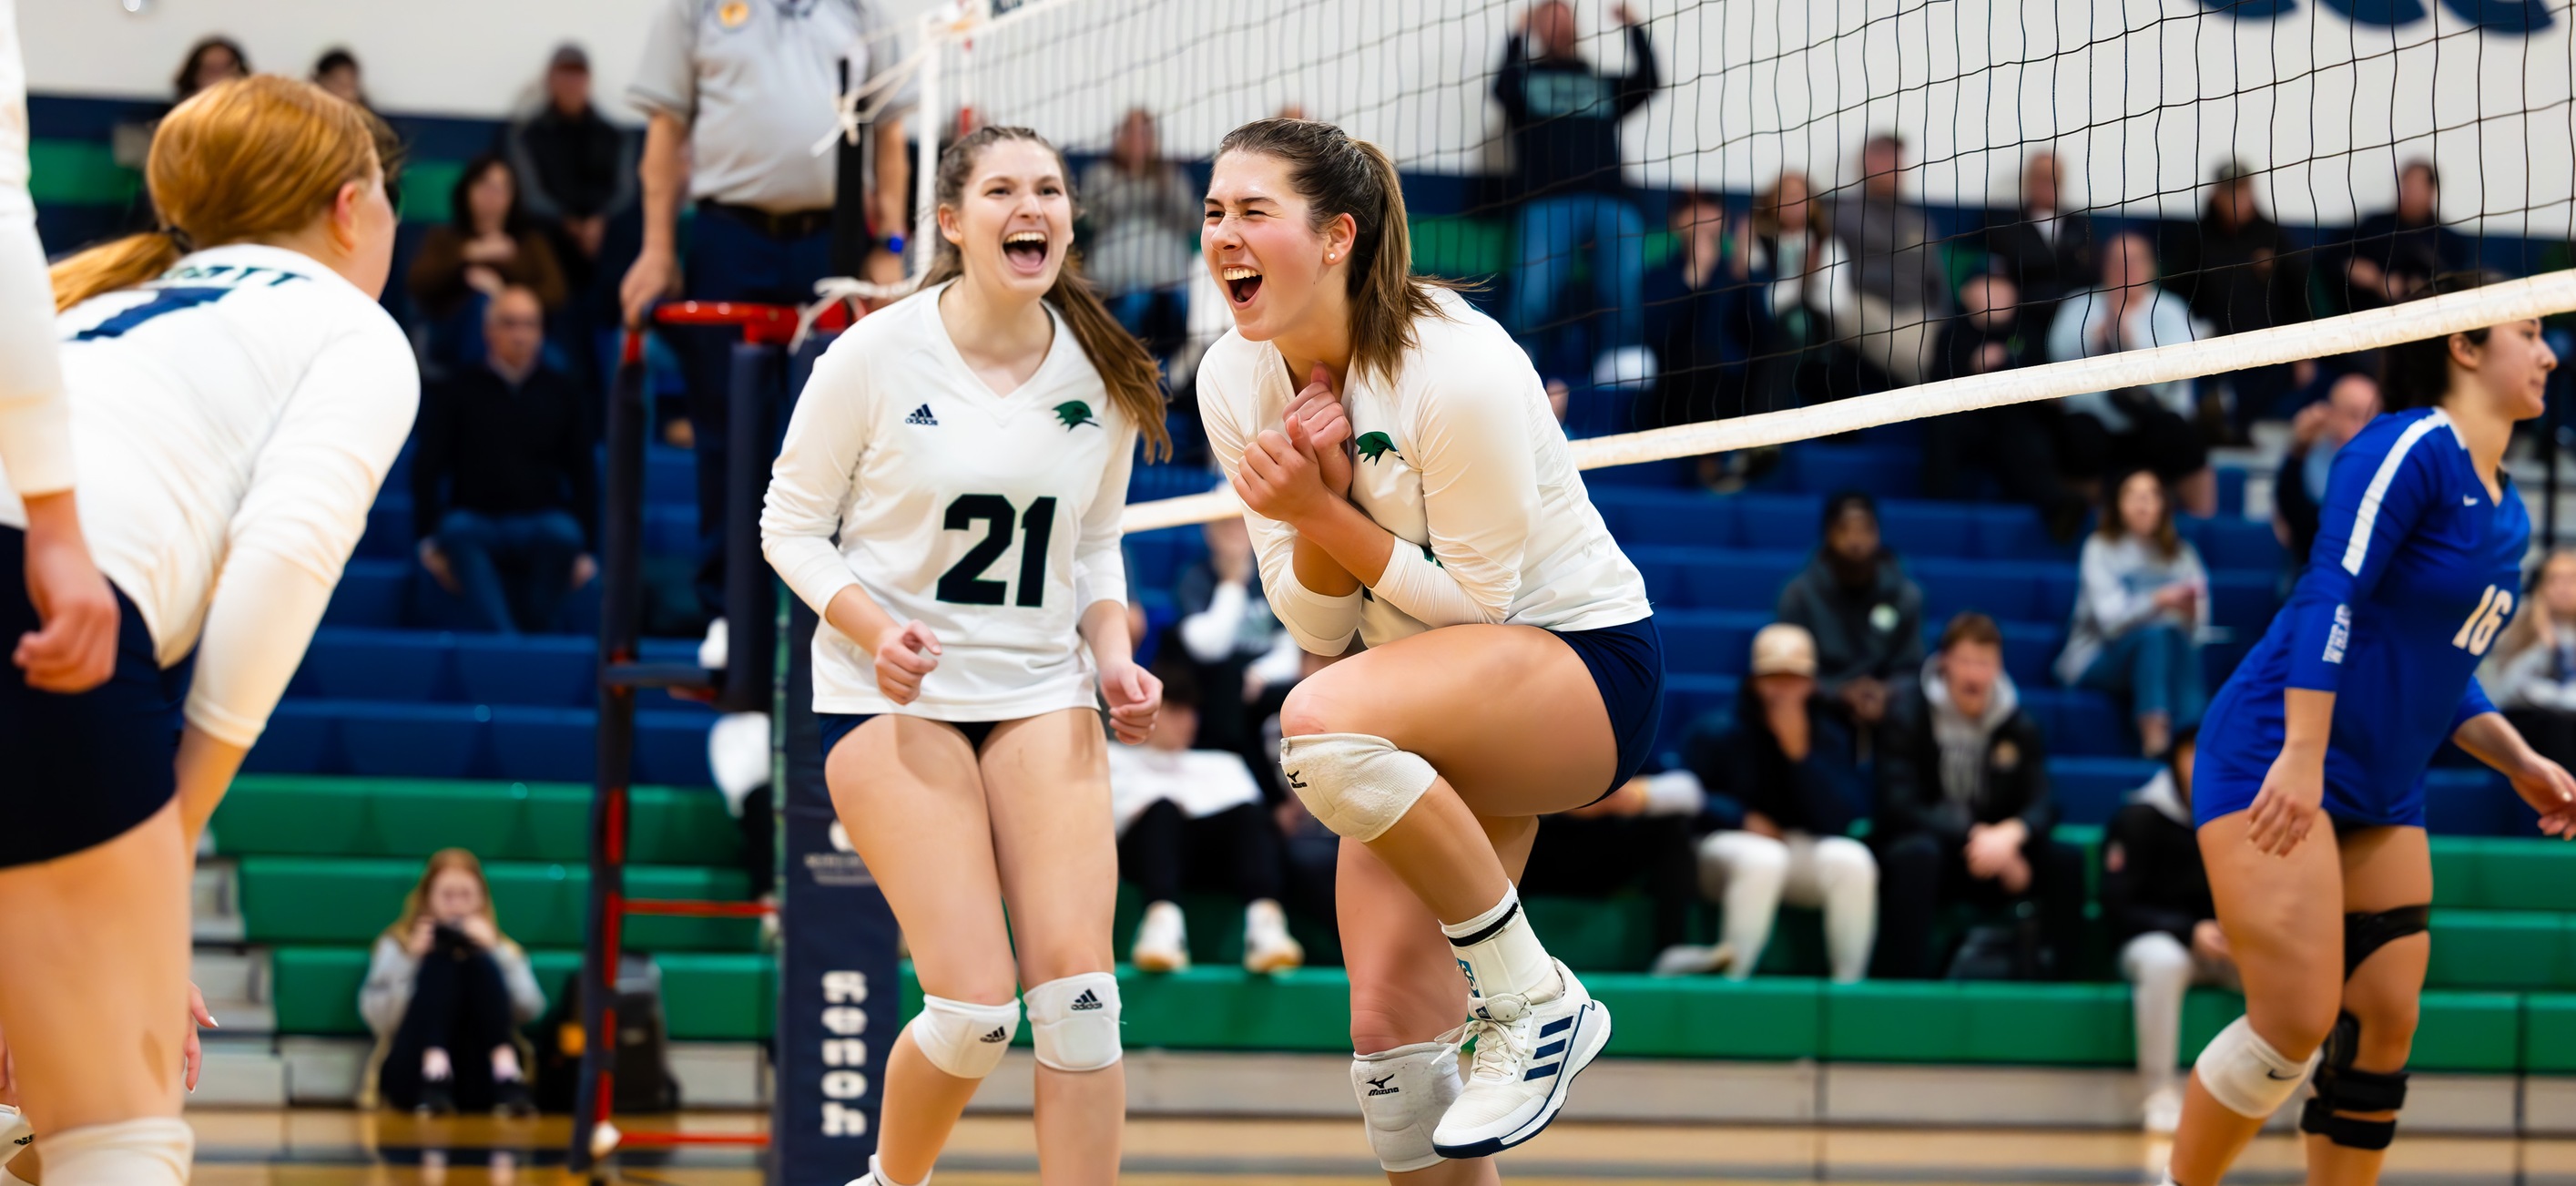 CCC CHAMPIONSHIP: Women's Volleyball Travels To Wentworth For Shot At Title